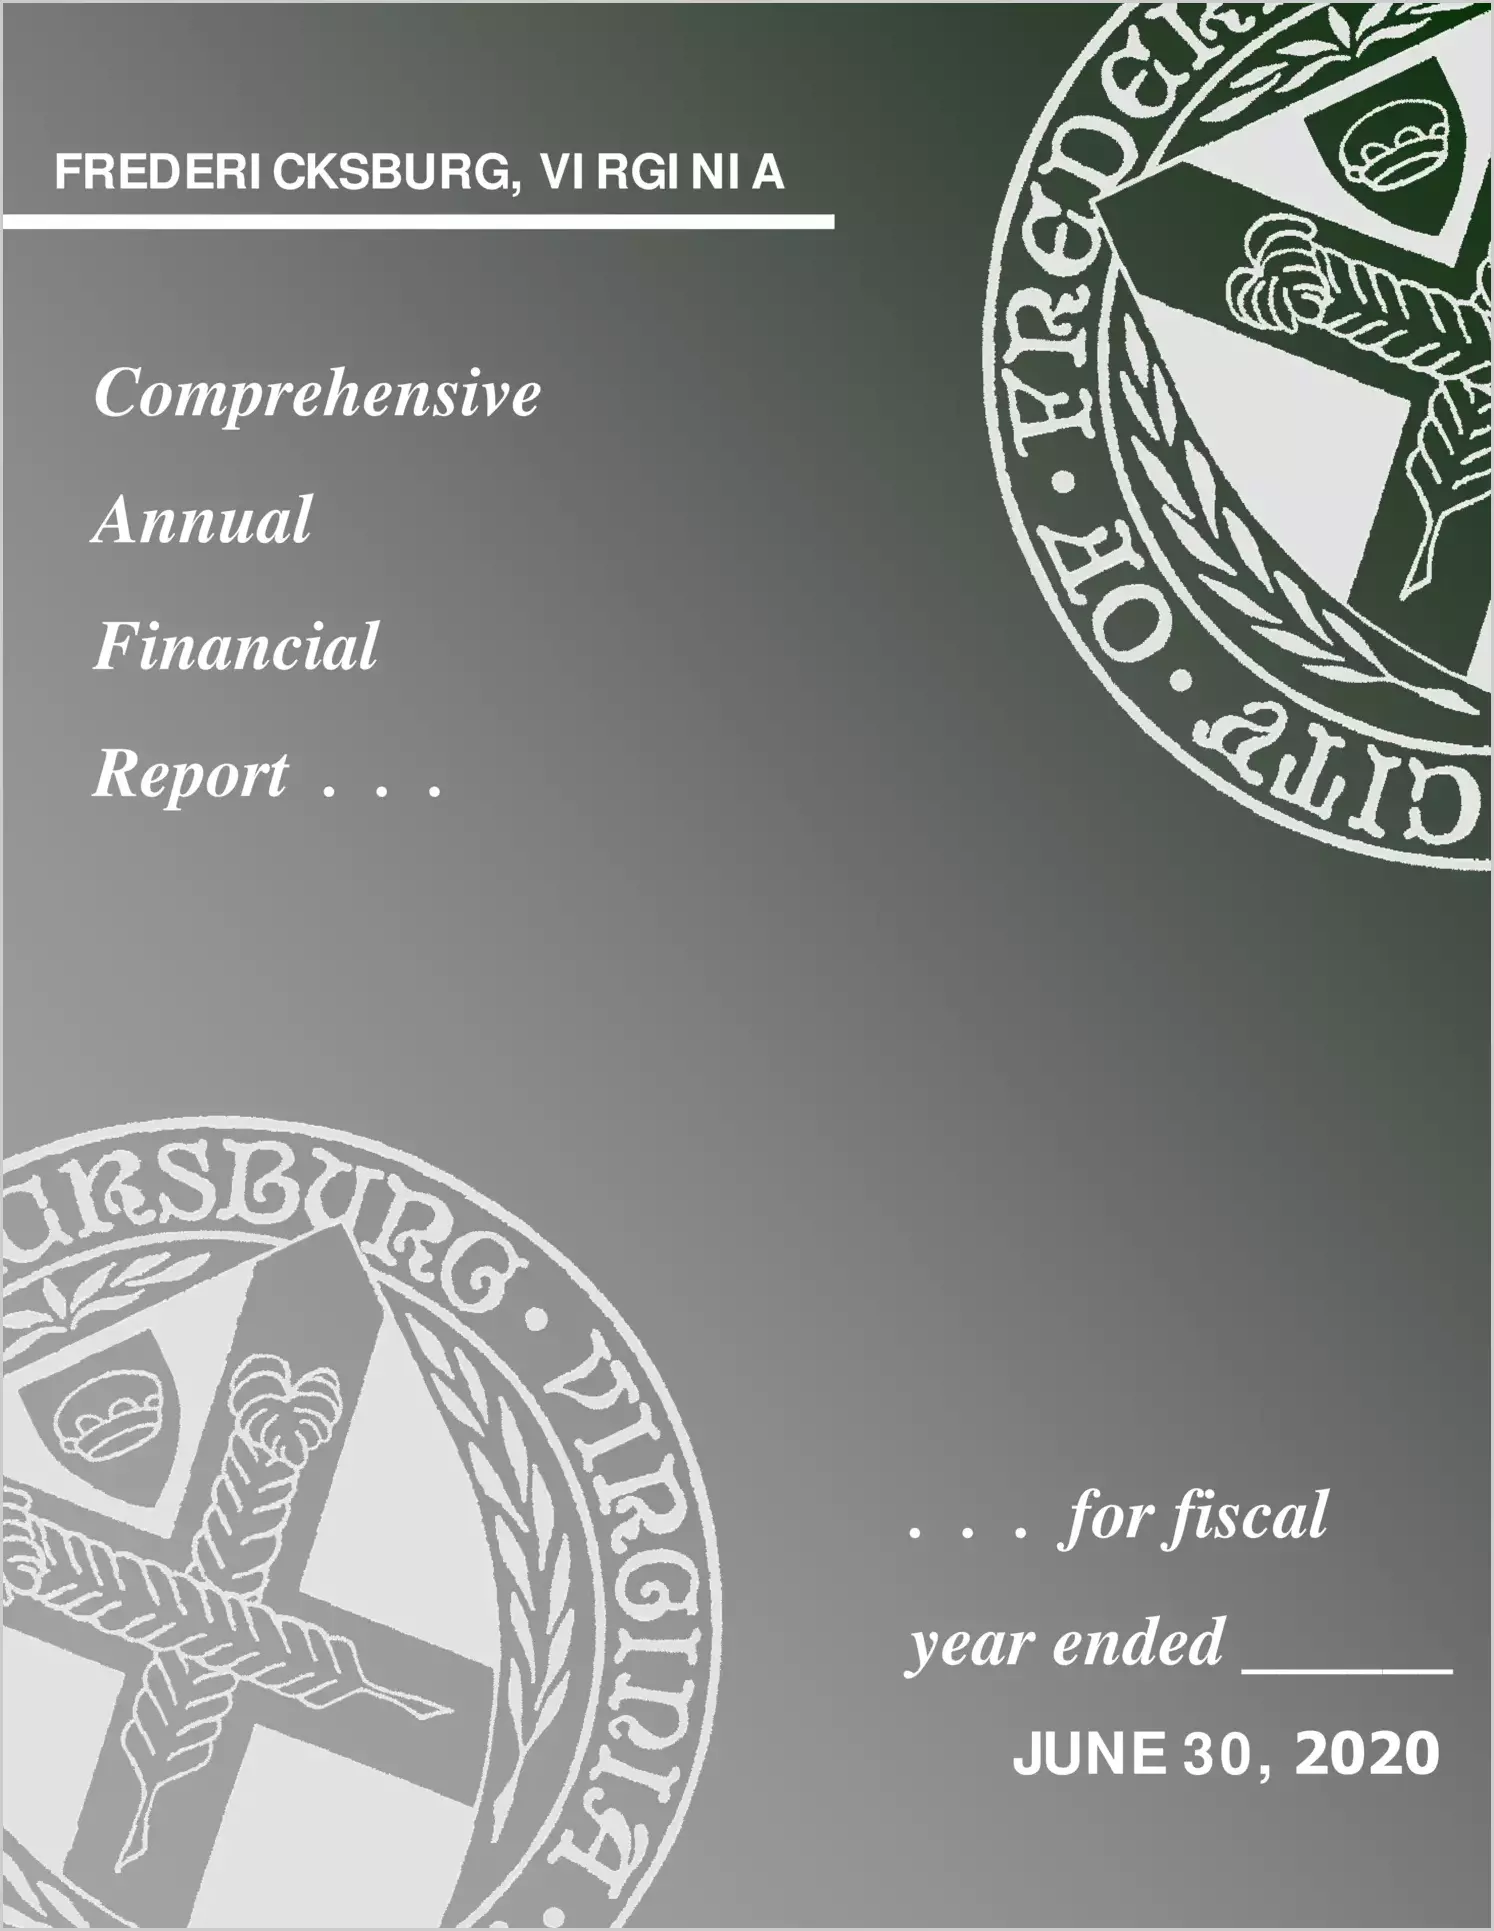 2020 Annual Financial Report for City of Fredericksburg